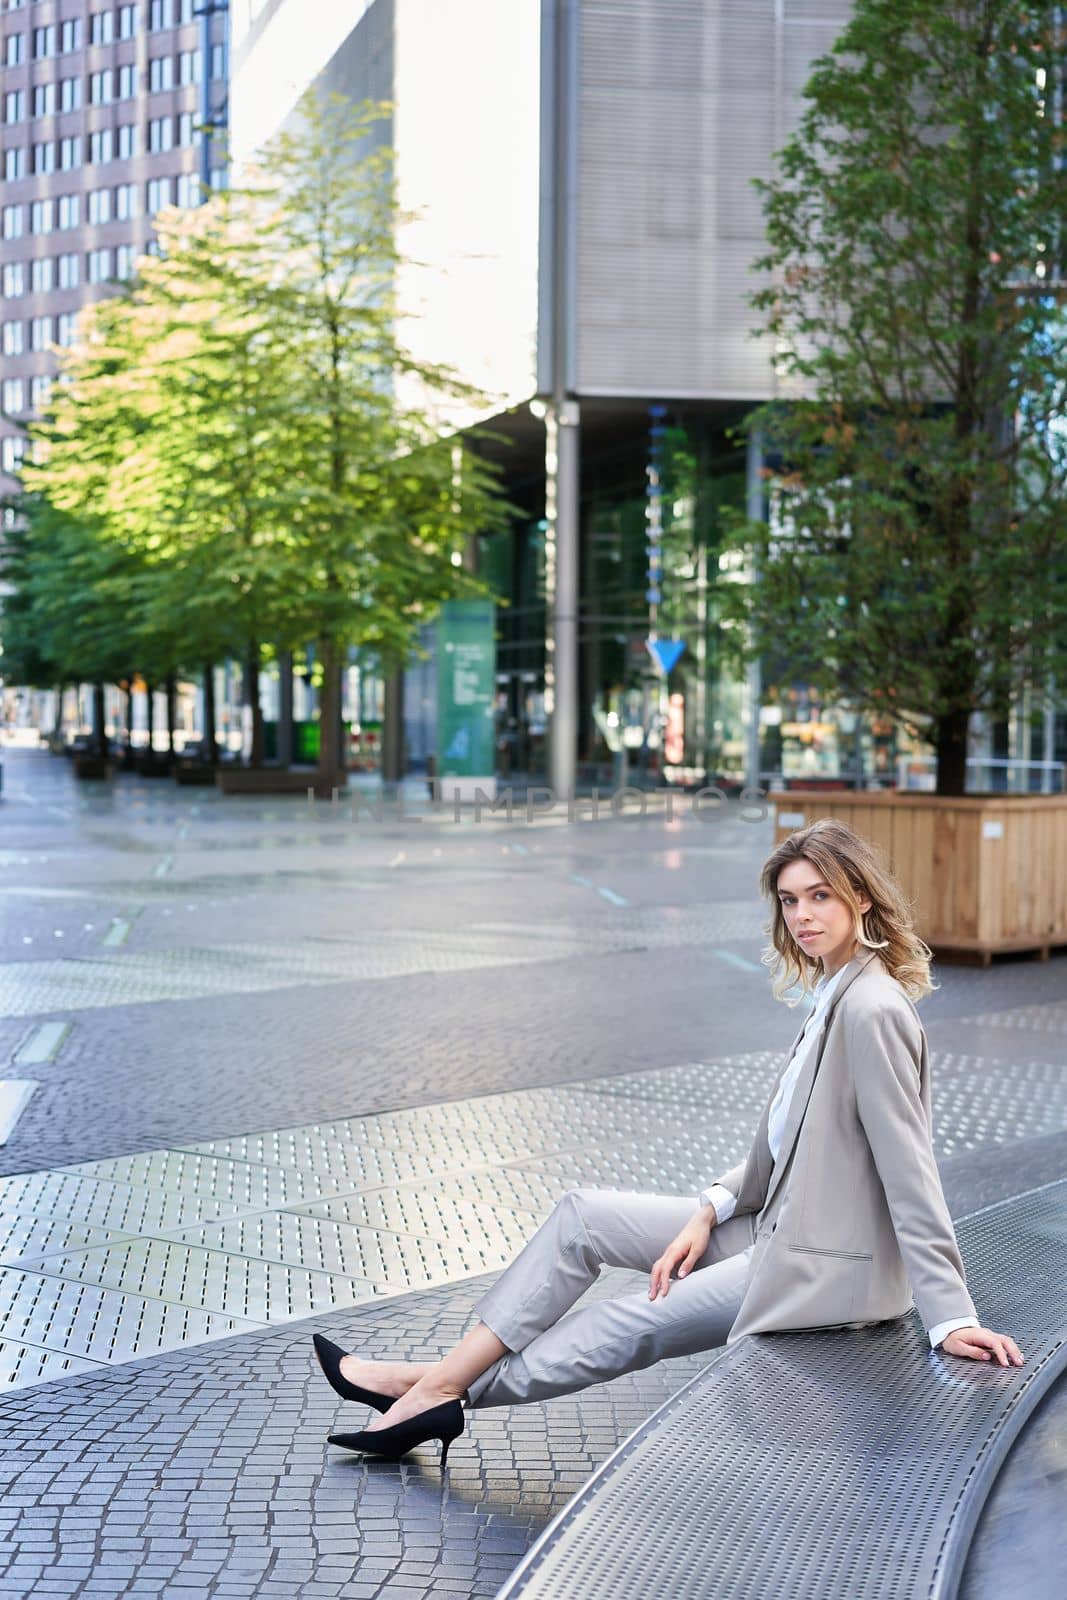 Vertical shot of beautiful businesswoman in beige suit, sitting outdoors in city centre and smiling at camera.